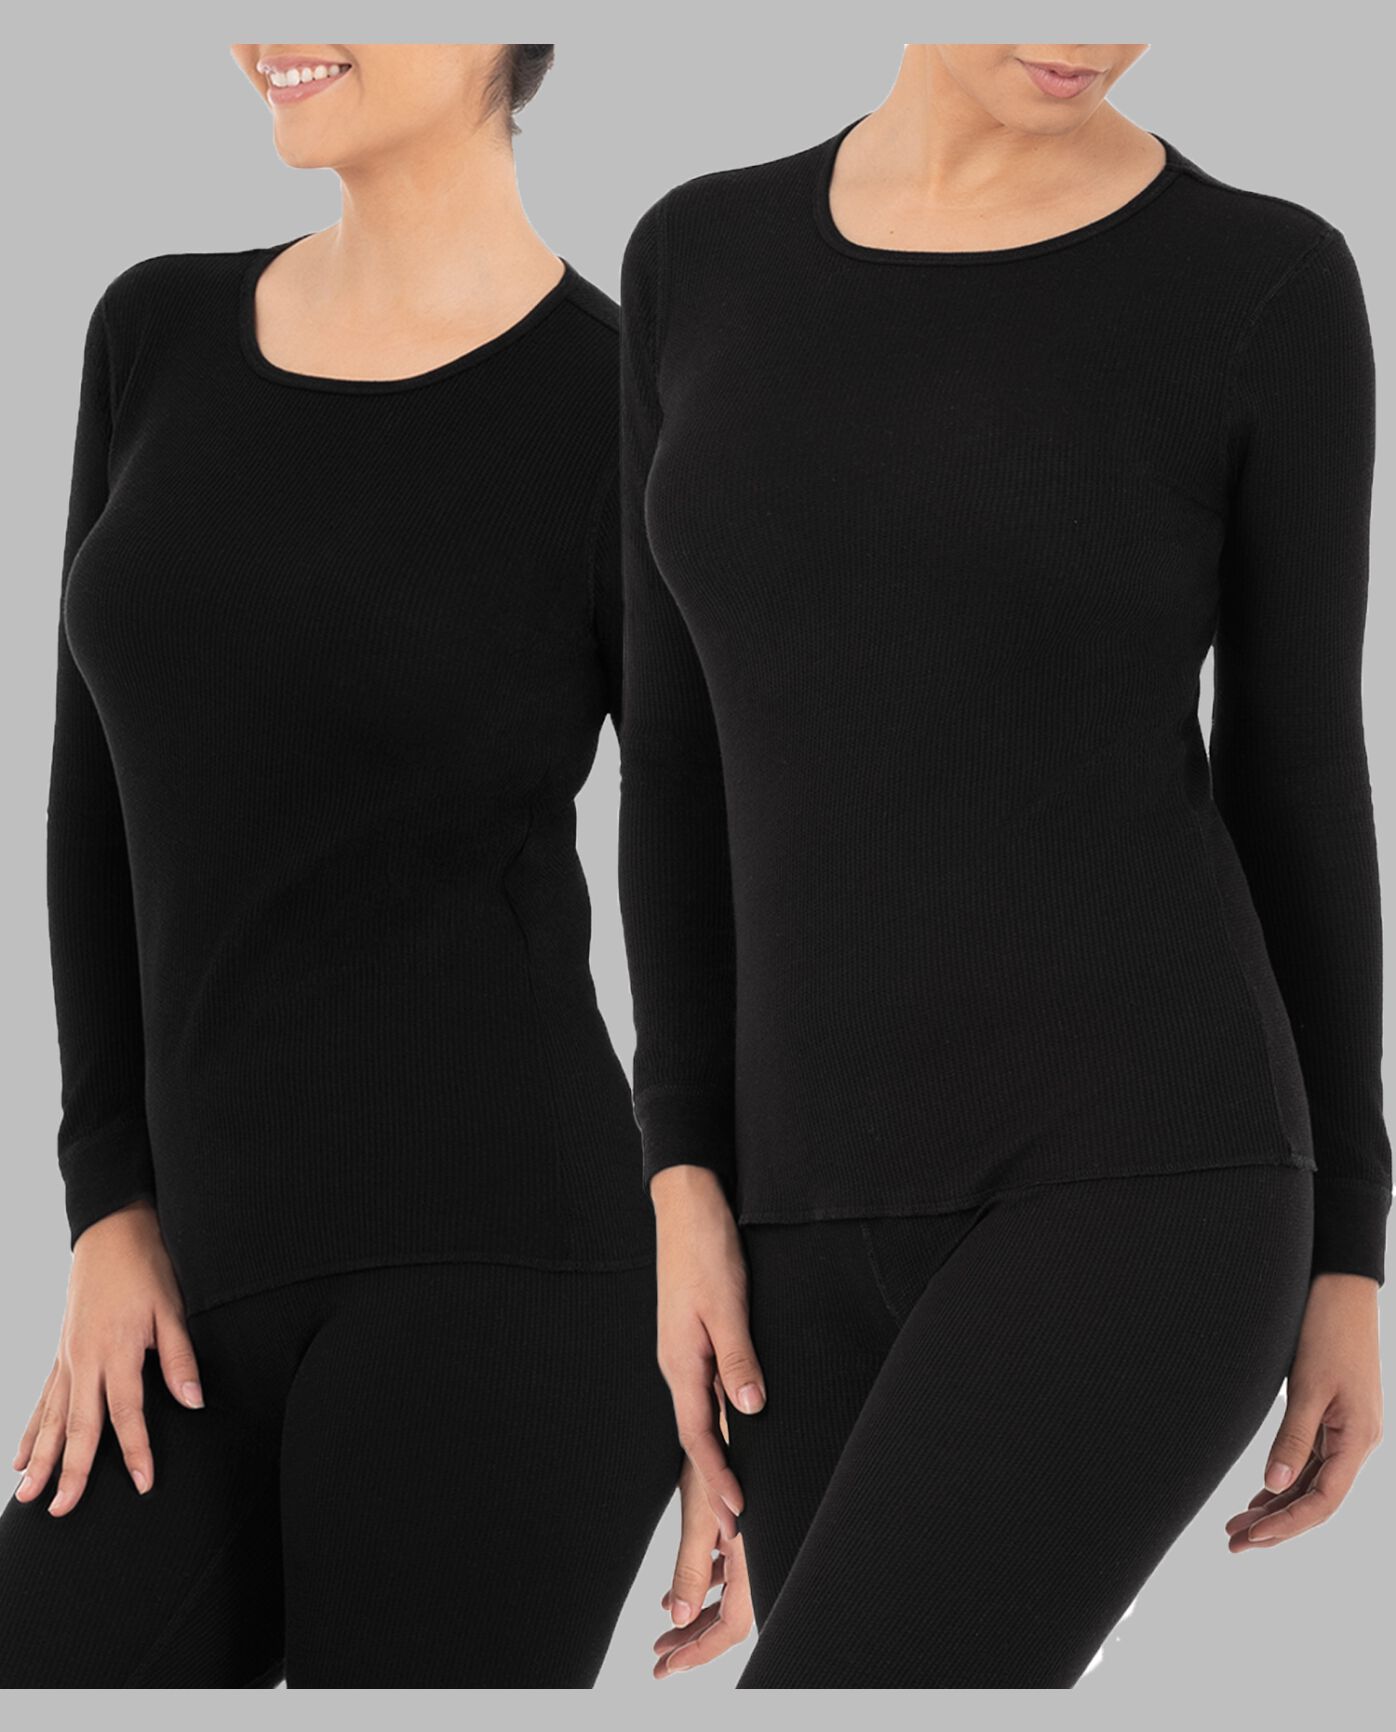 dechifrere spin Underinddel Women's Thermal Crew Top | Fruit of the Loom Thermals